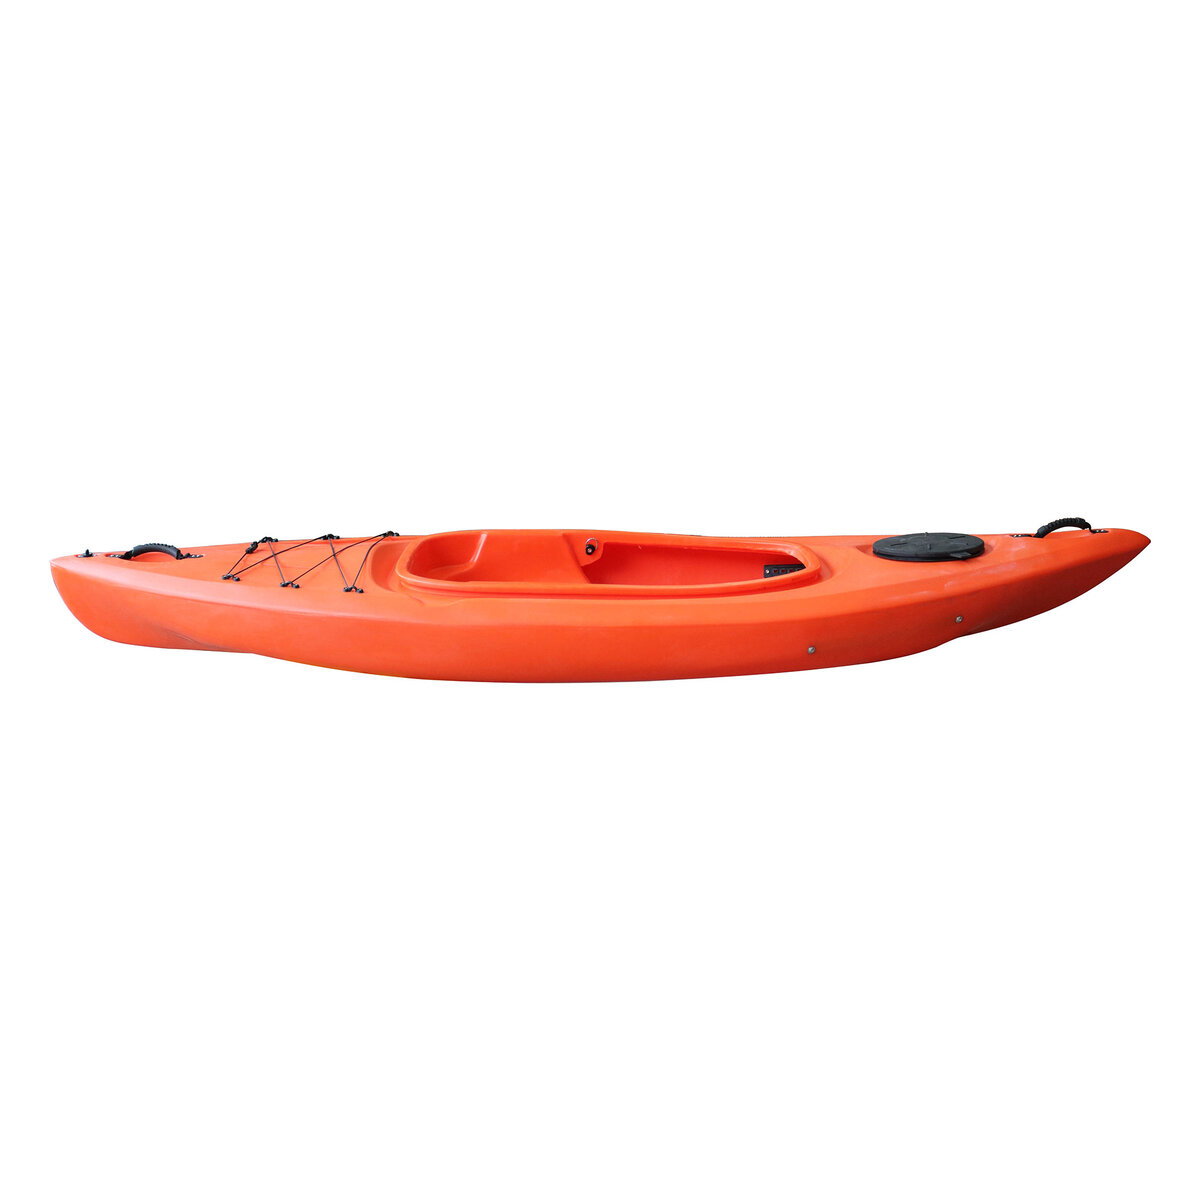 Skid Fusion Kayak 1-Person with Paddle VK-08 280x78x28cm